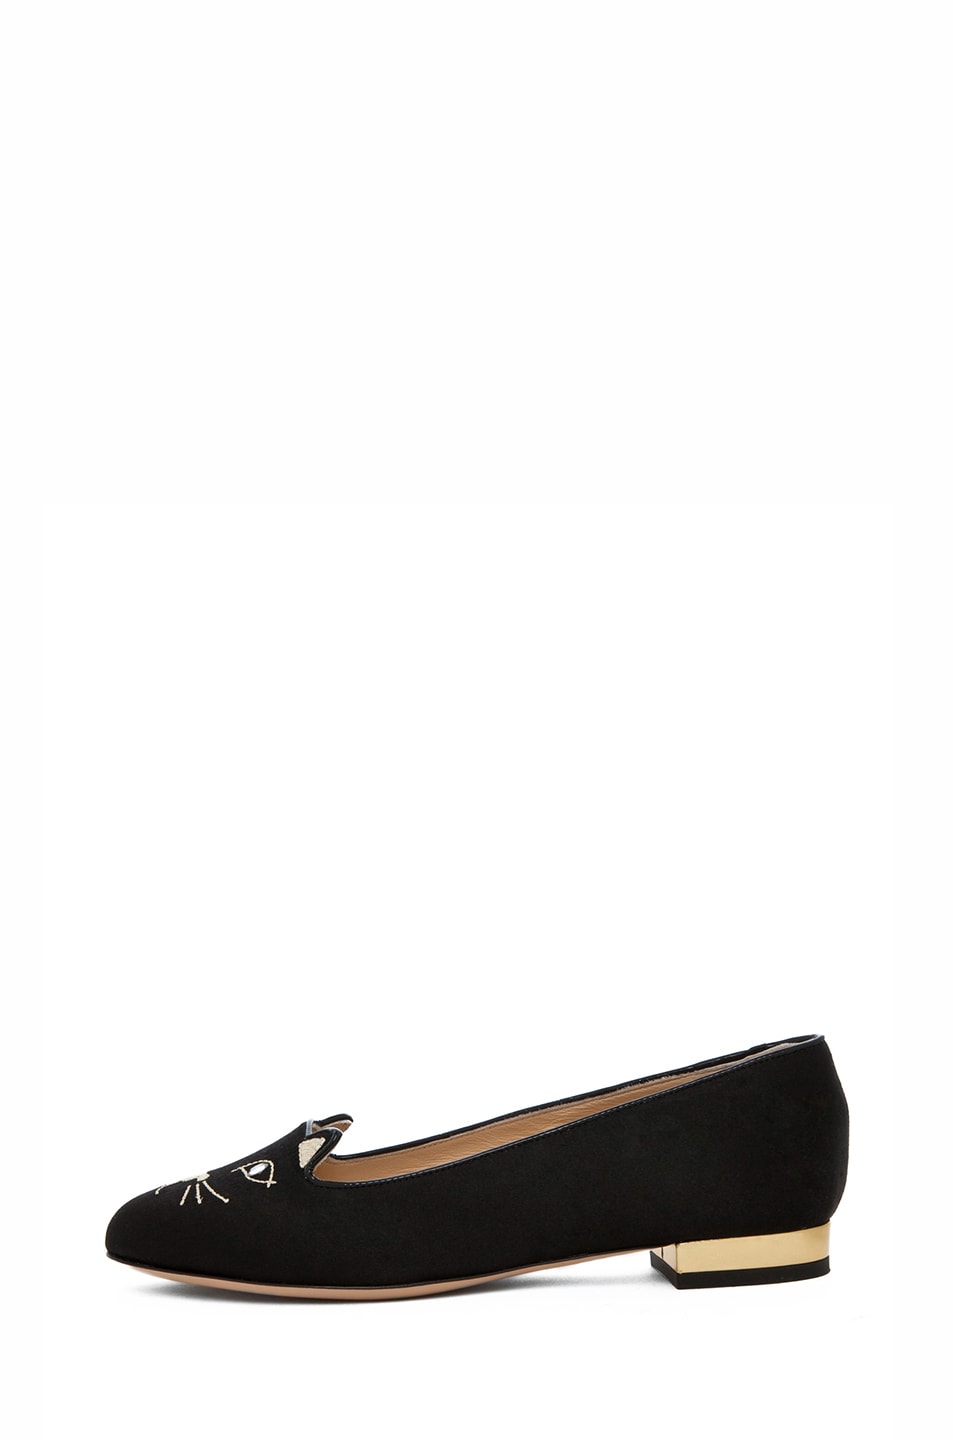 Image 1 of Charlotte Olympia Kitty Satin Flats in Black & Gold